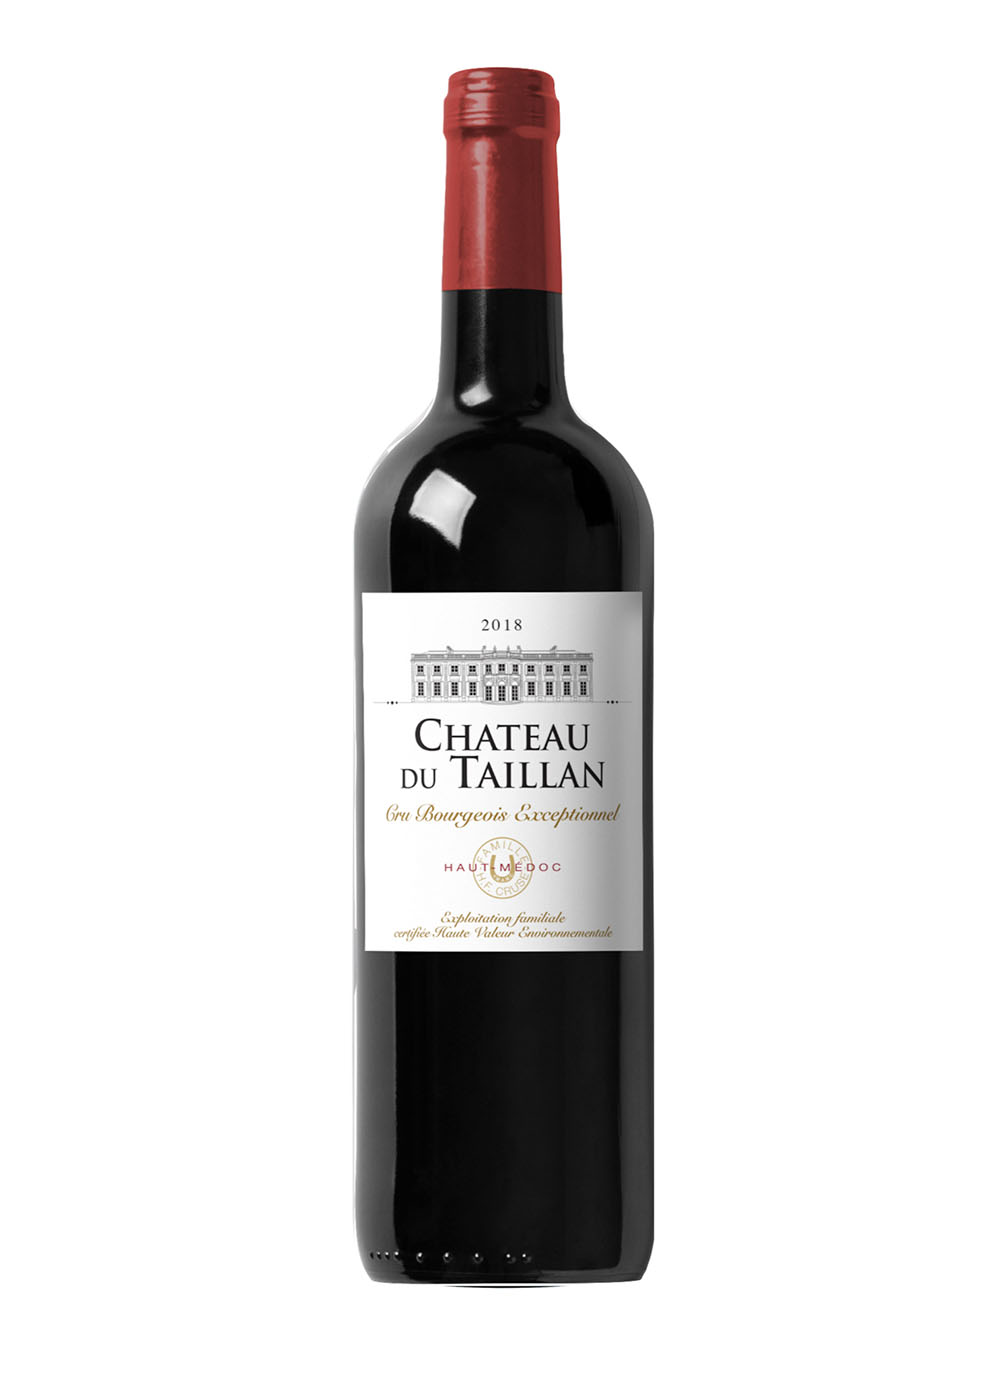 Taillan 2018 - Cru Bourgeois Exceptionnel